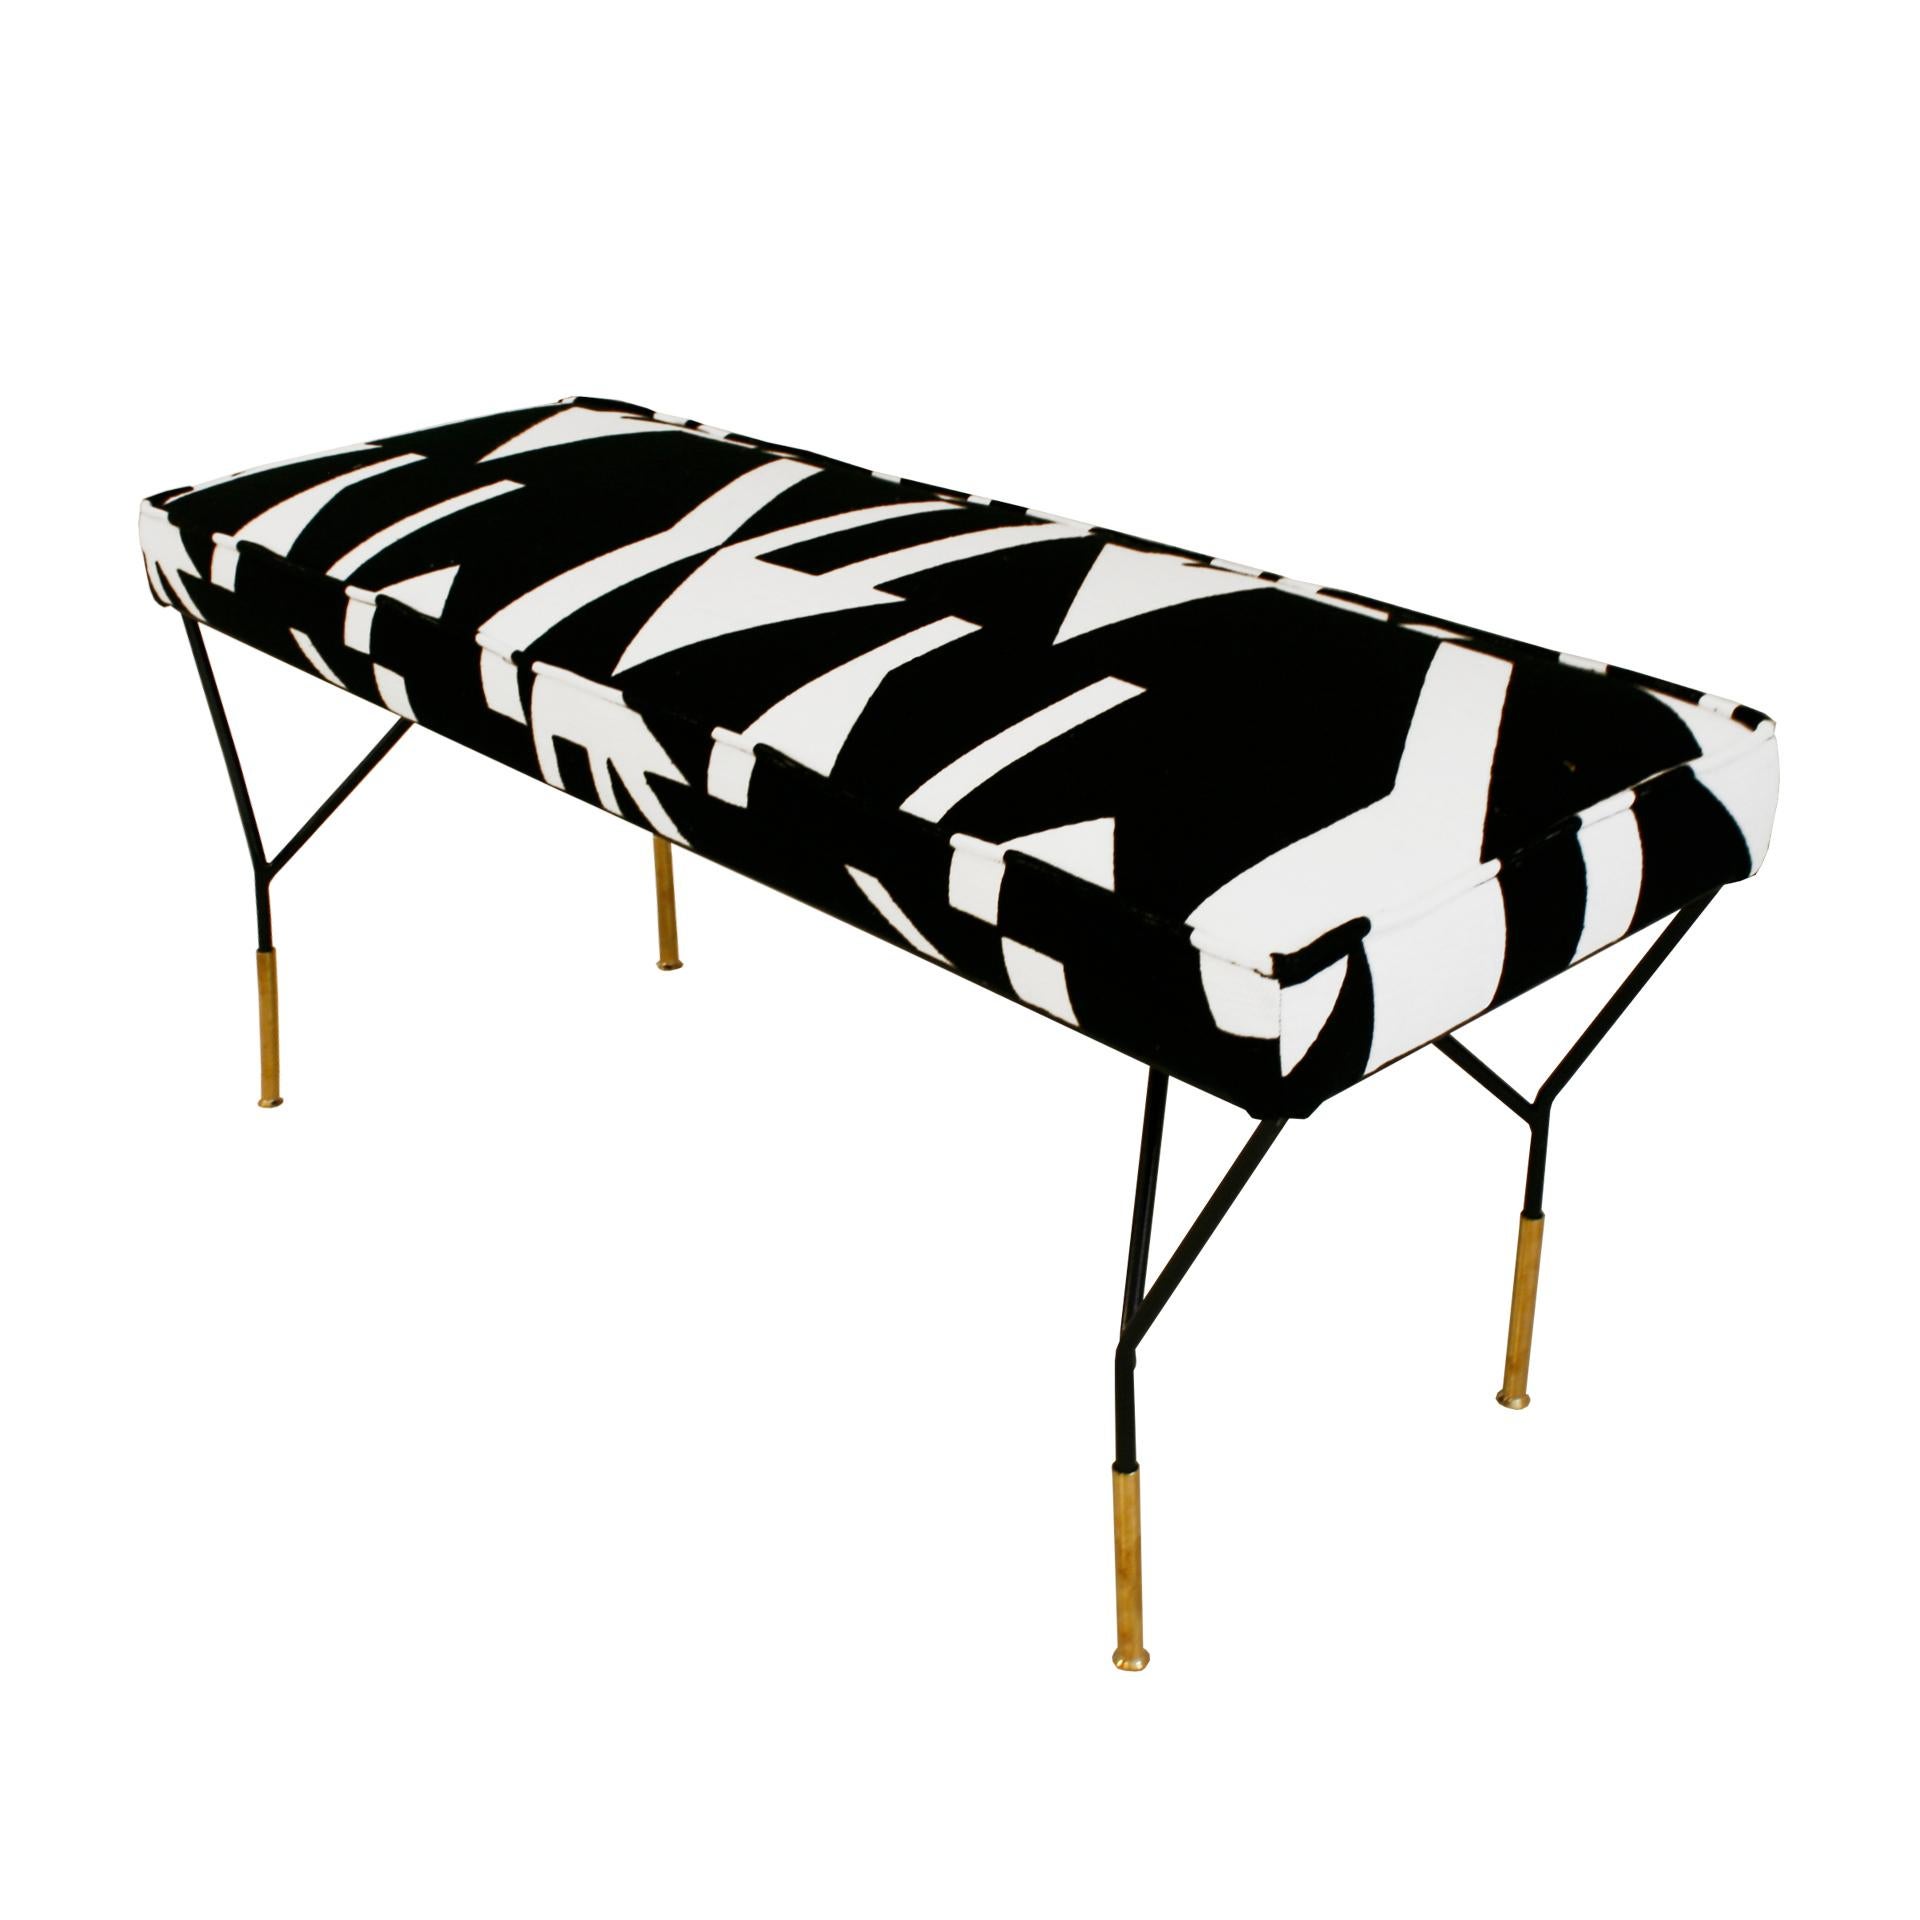 Footstool with black lacquered iron structure and legs ending in brass sleeves. Upholstered in Pierre Frey Patterned cotton fabric. Italy, 1970s.

Every item LA Studio offers is checked by our team of 10 craftsmen in our in-house workshop. Special